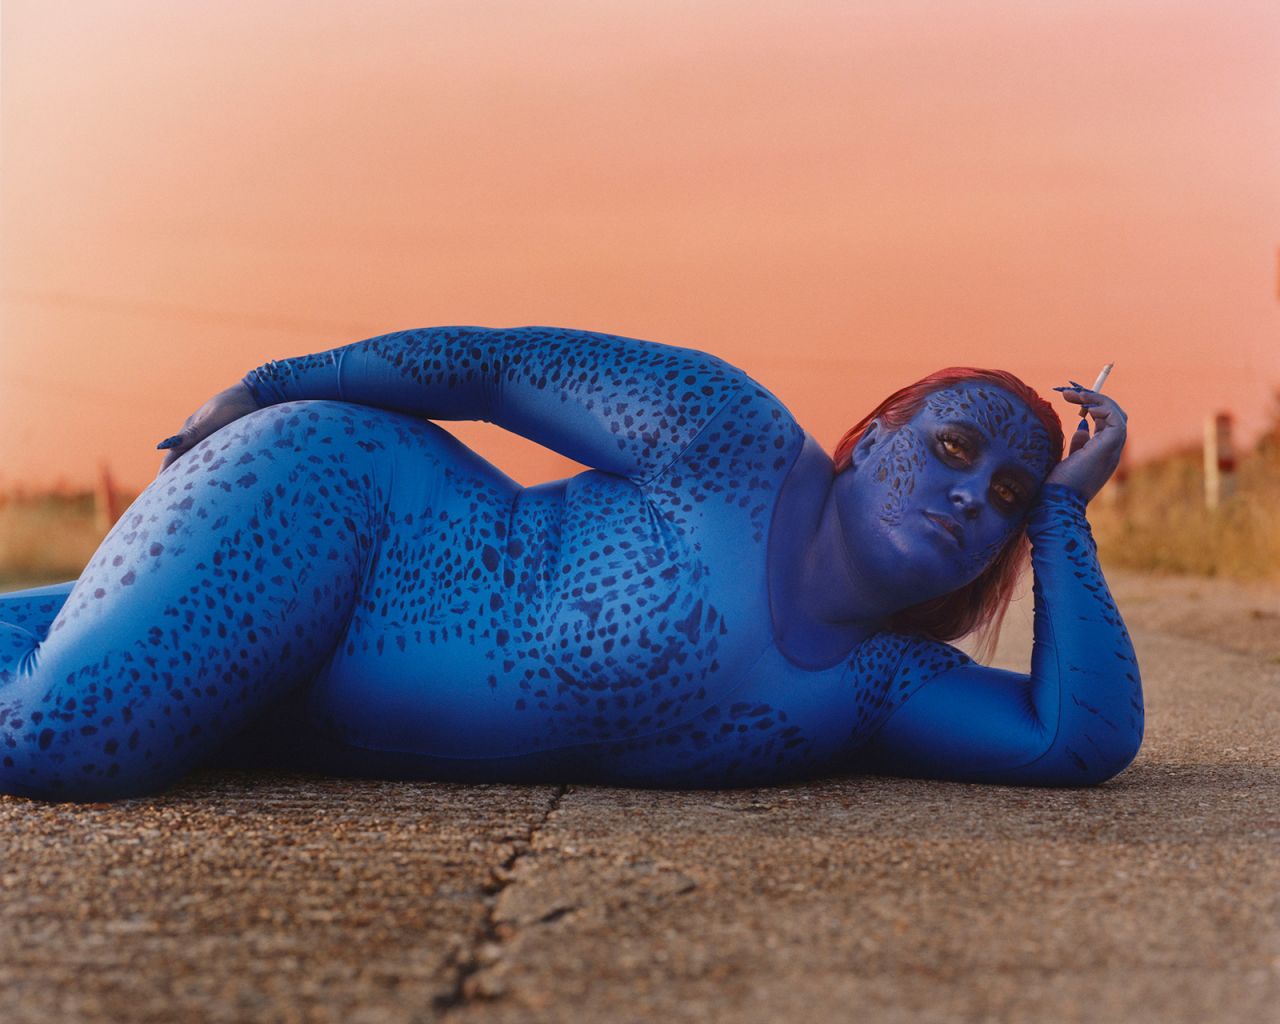 Mystique, from "X-Men," is photographed lying on the ground, cigarette in hand. 